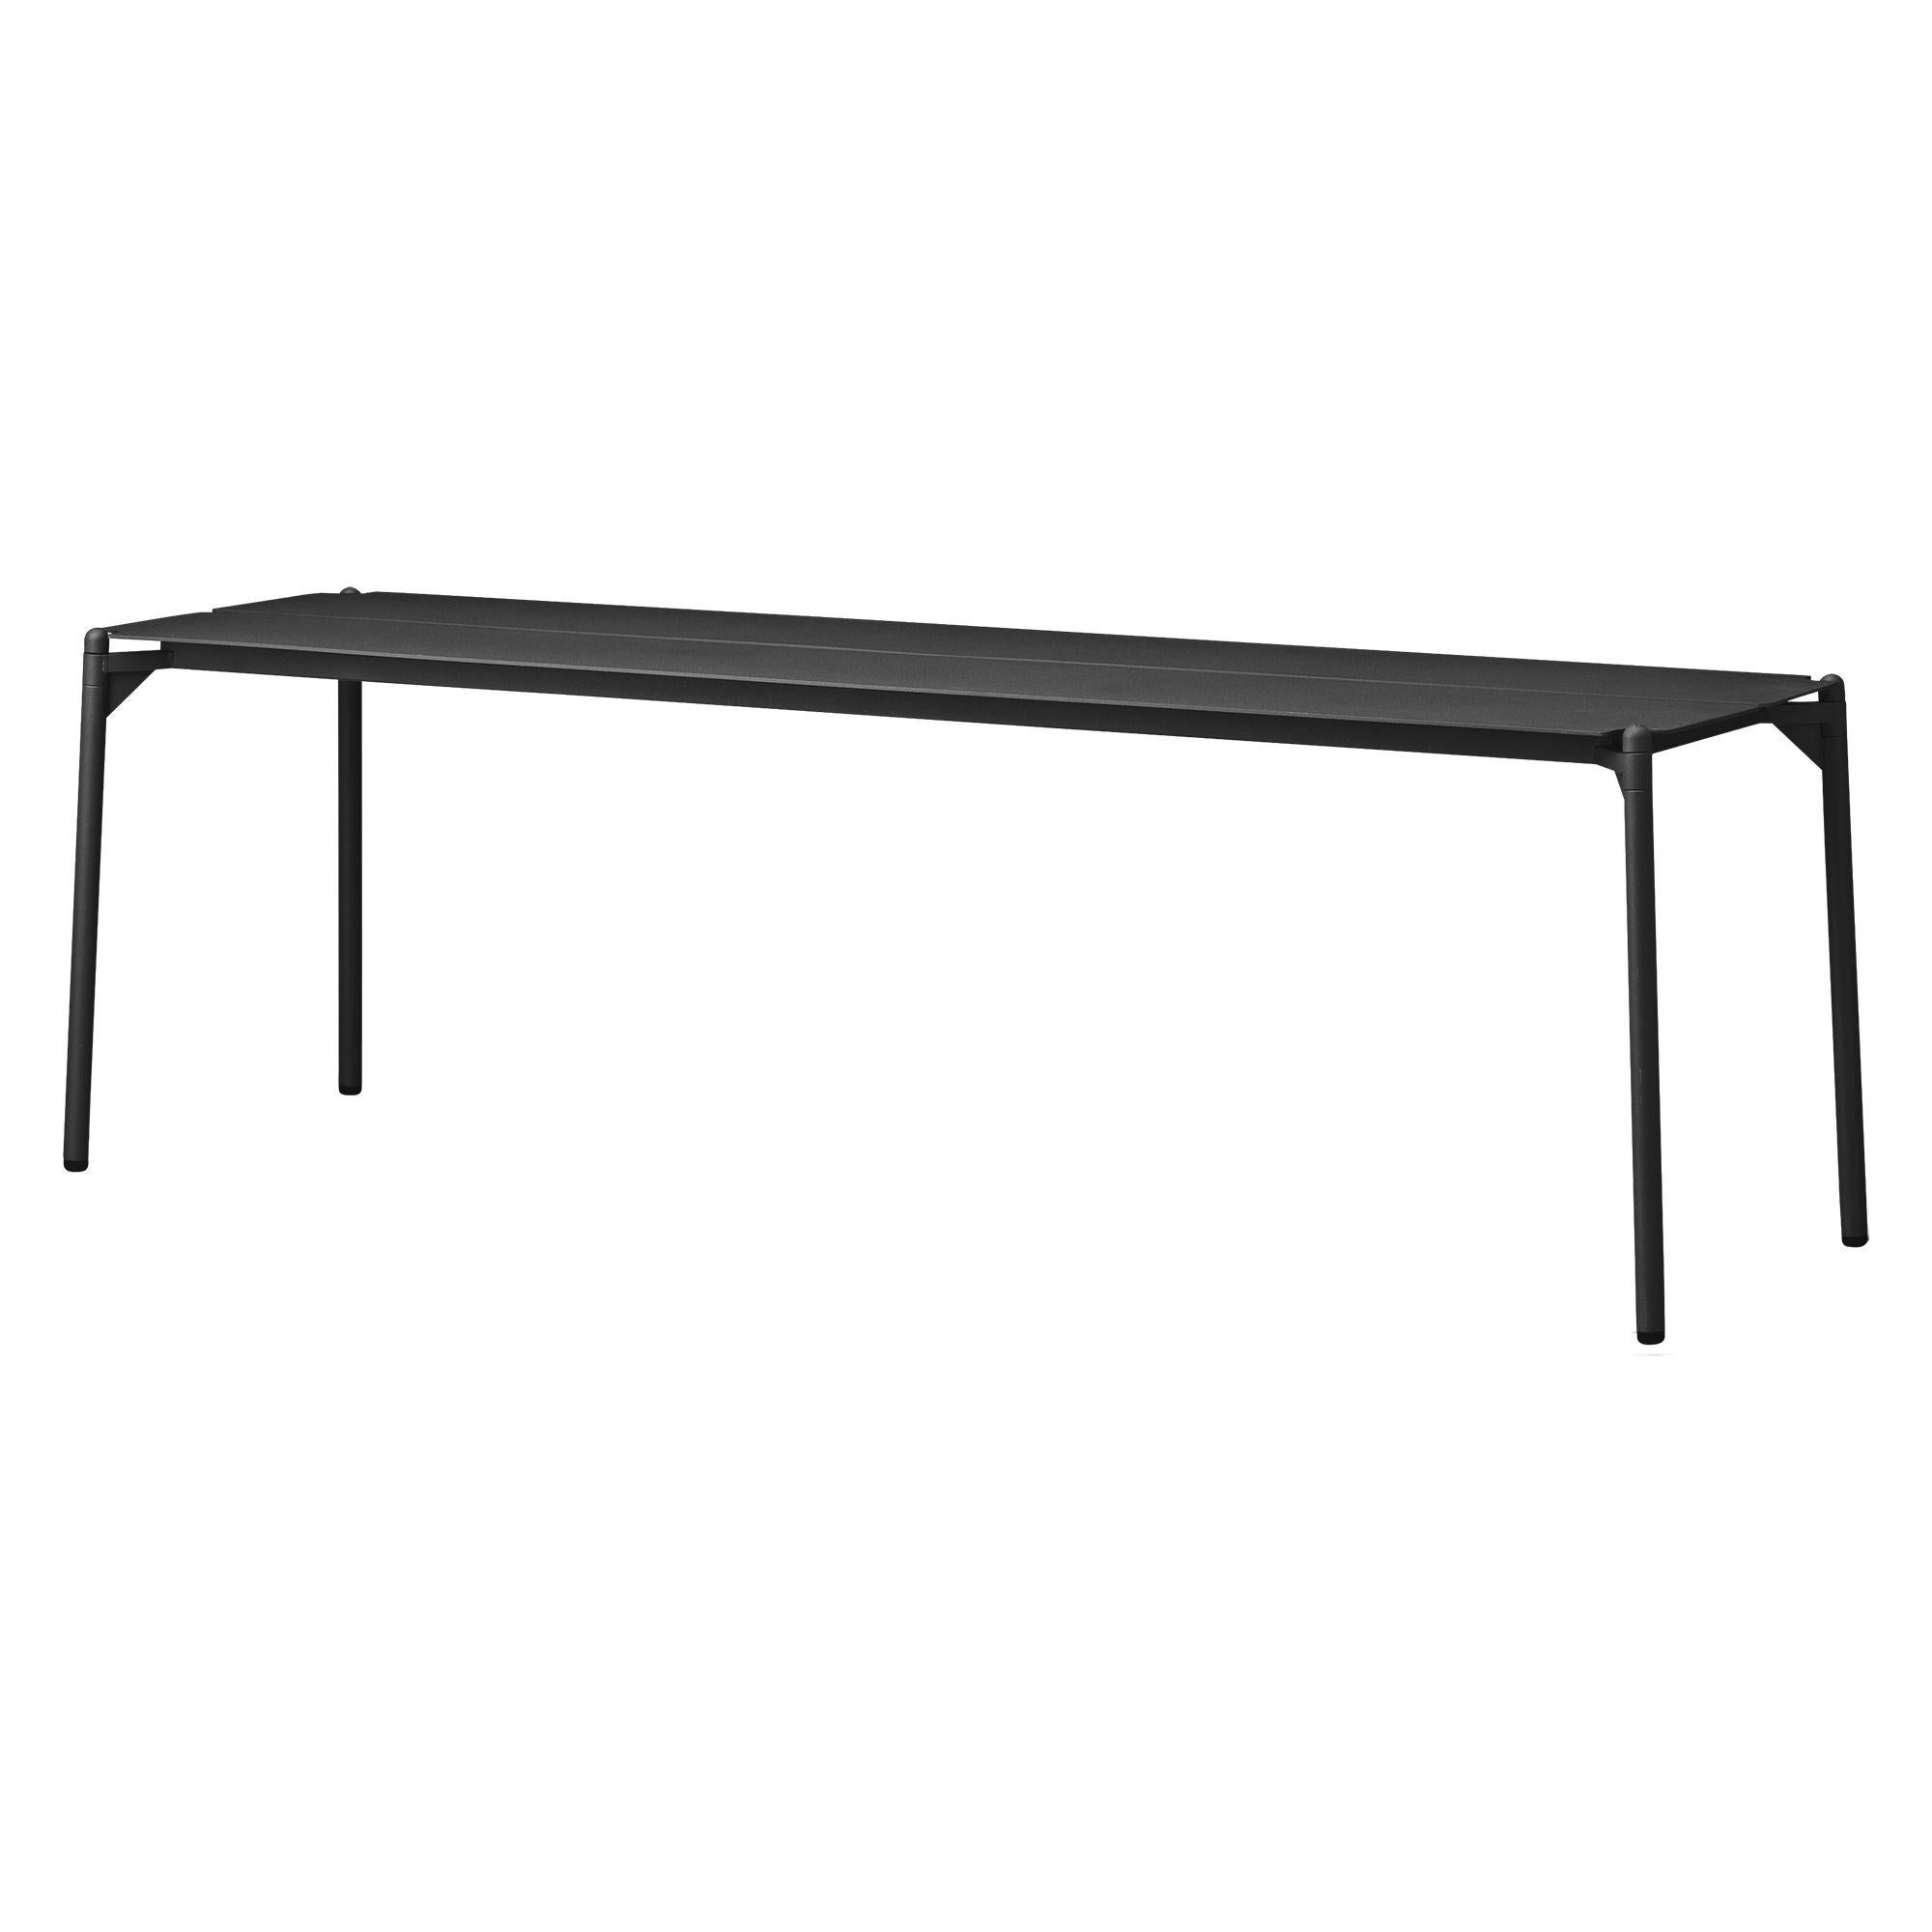 Black Minimalist bench
Dimensions: D 145 x W 43.3 x H 45.5 cm 
Materials: Steel w. Matte powder coating & aluminum w. Matte powder coating.
Available in colors: Taupe, bordeaux, forest, ginger bread, black and, black and gold.


With NOVO